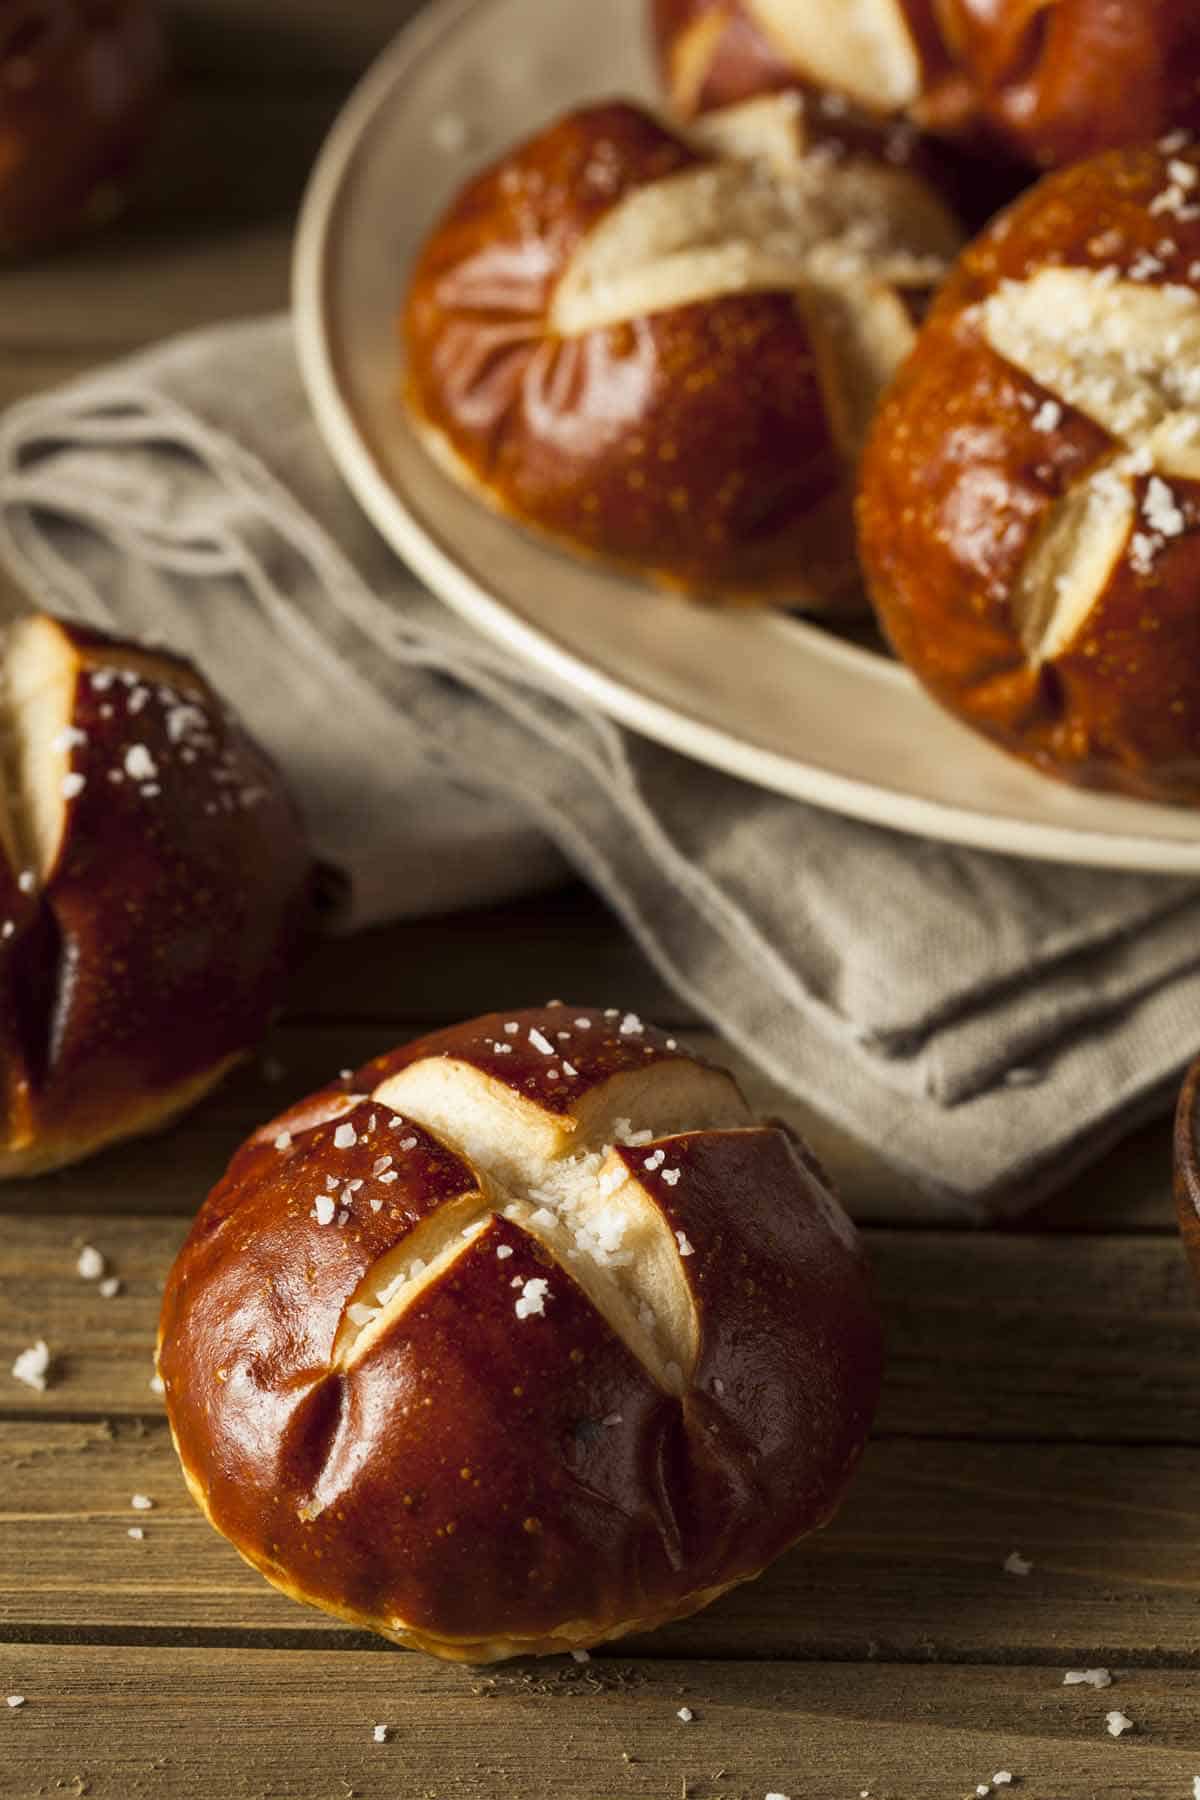 Bowl of pretzel buns. Pretzel buns are on of the best breads for sloppy joes sandwiches.